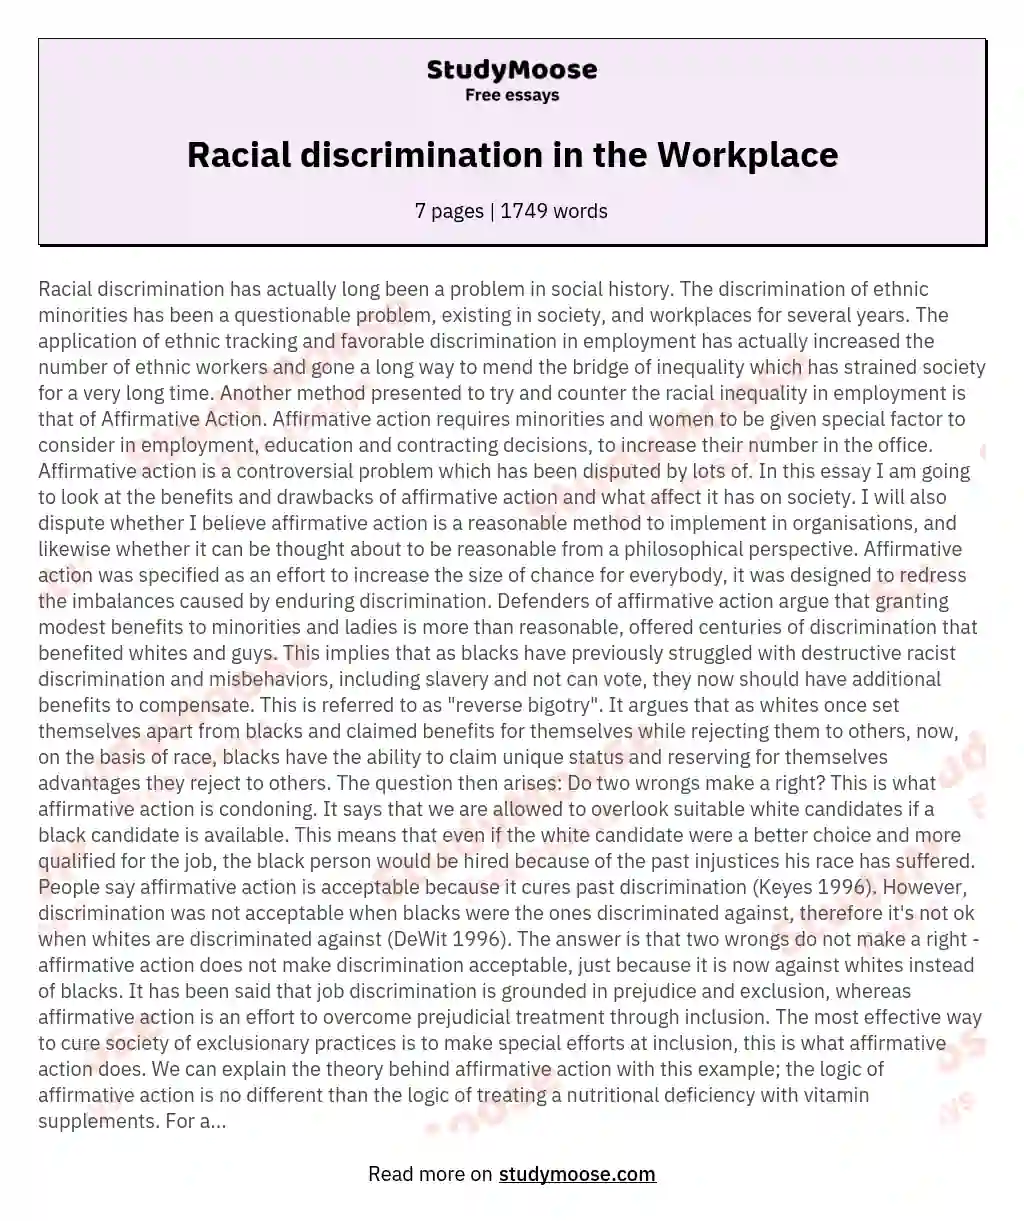 Racial discrimination in the Workplace essay